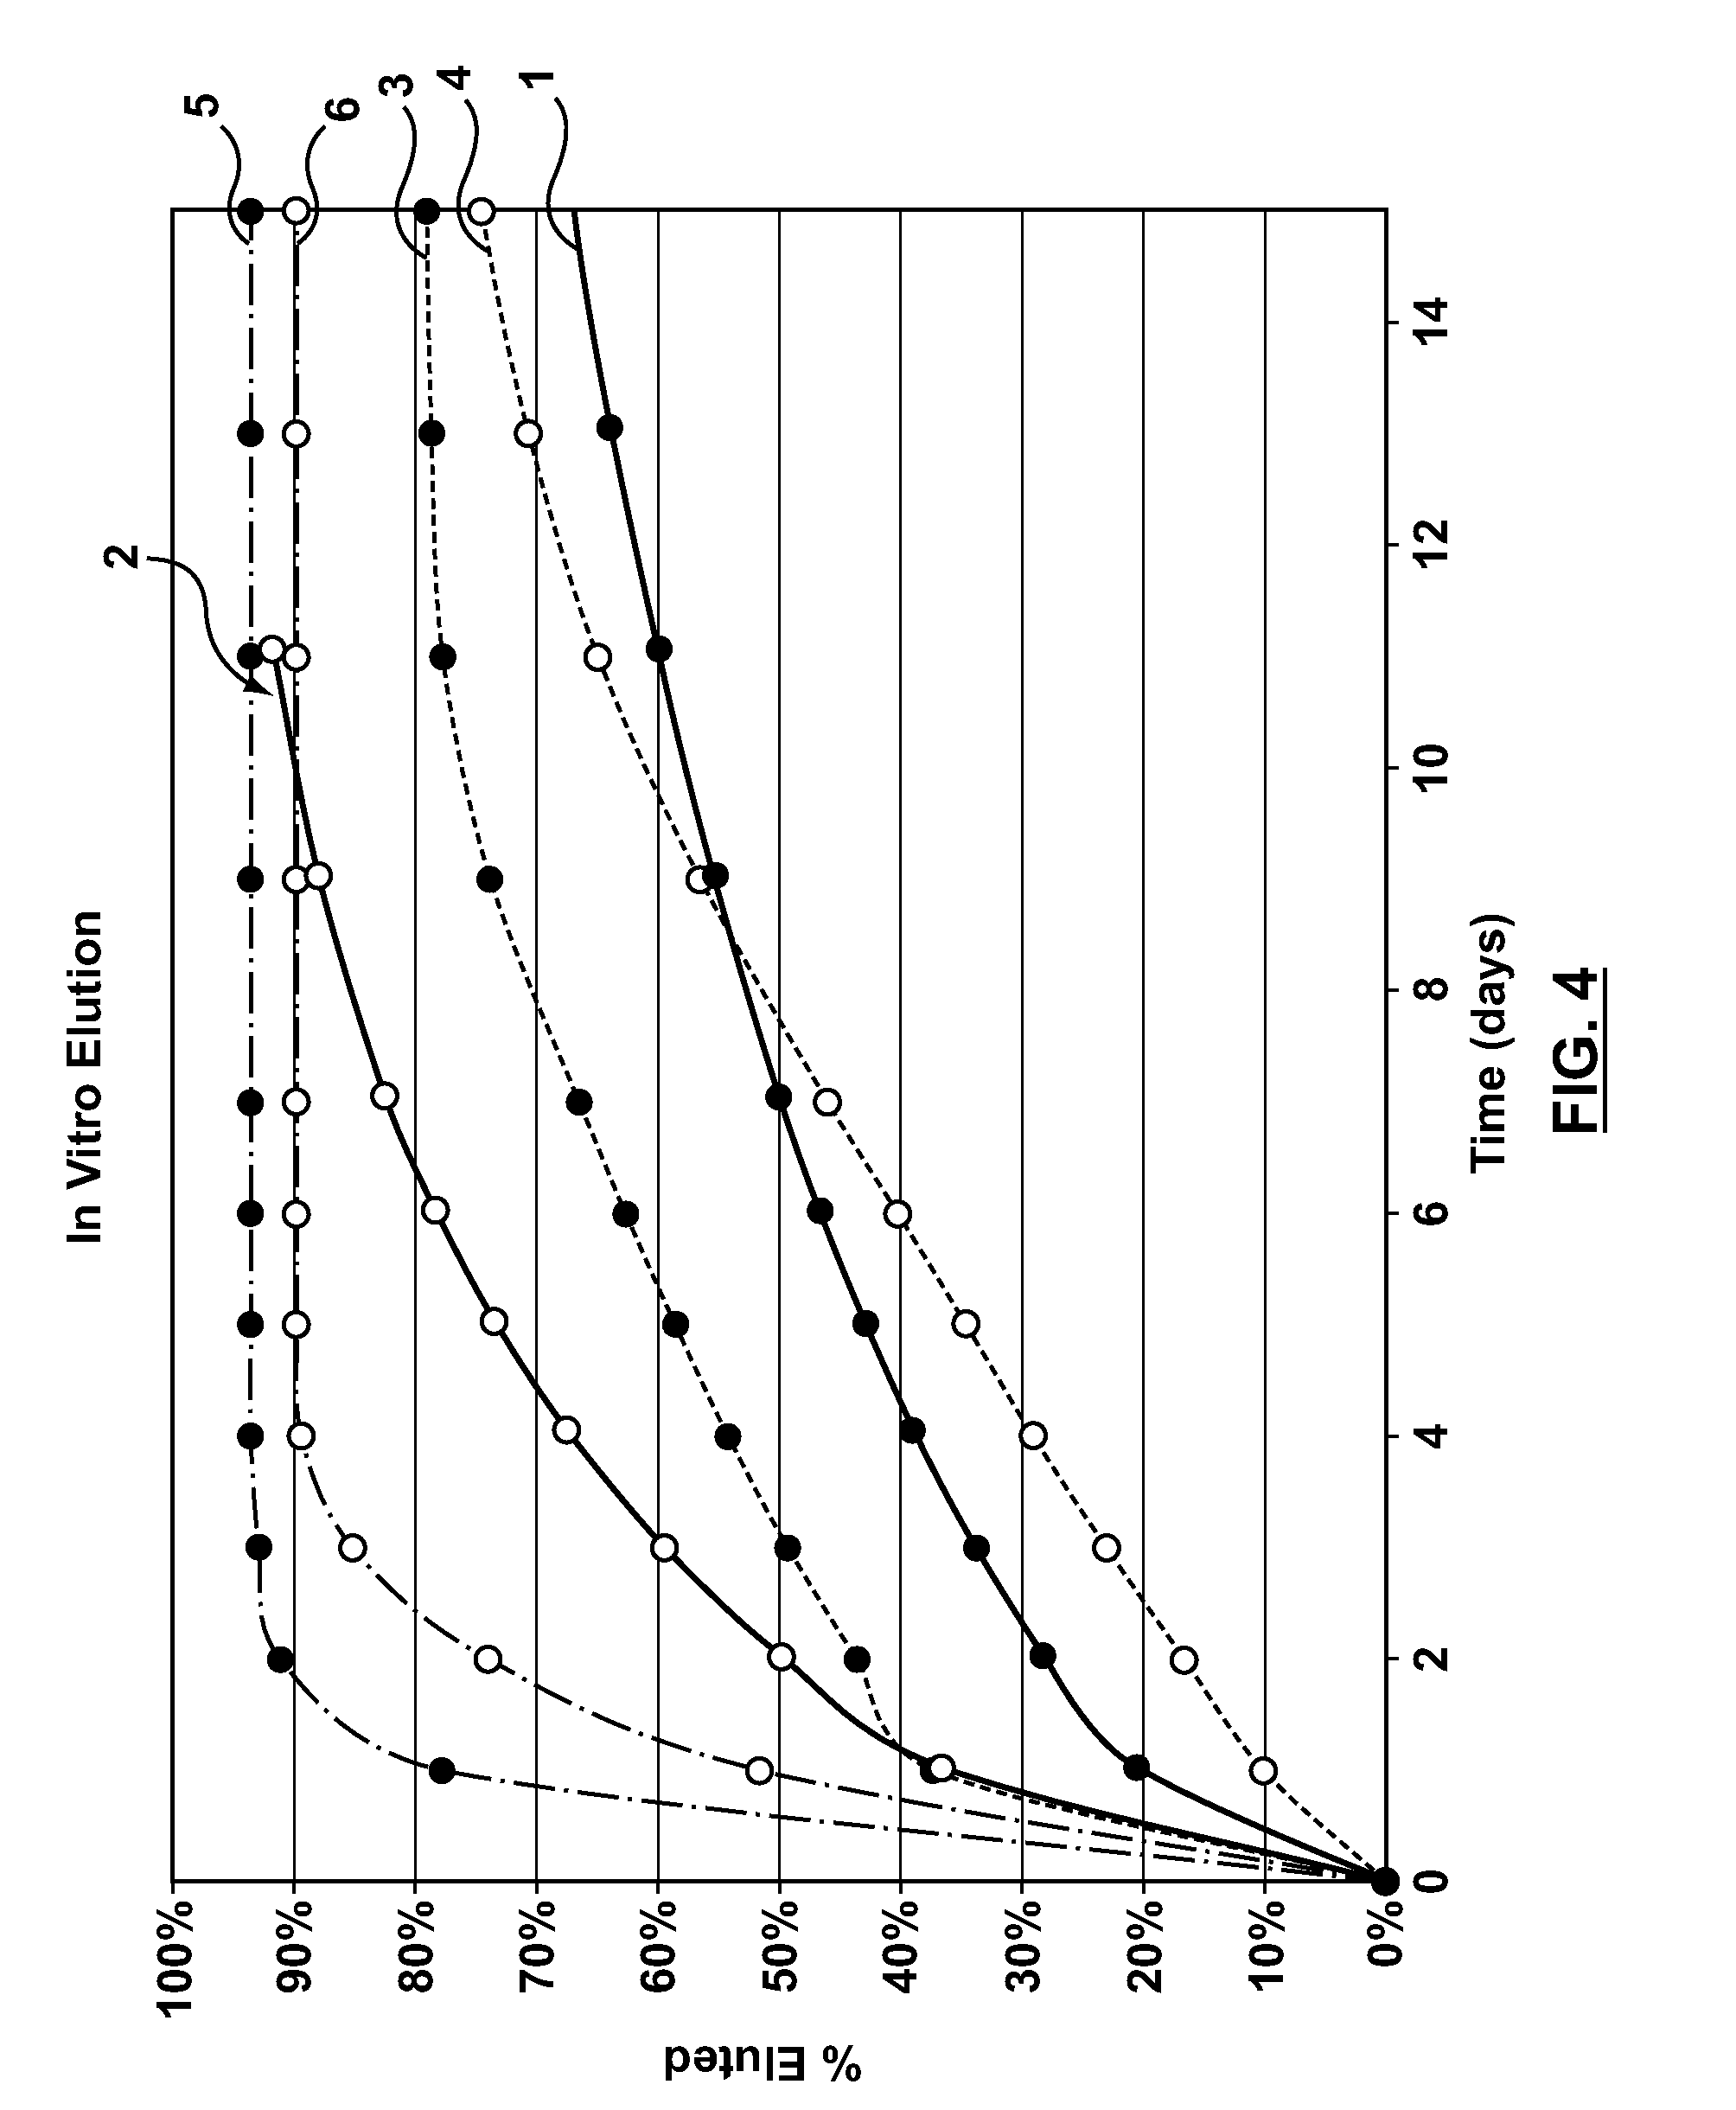 Apparatus and methods for loading a drug eluting medical device